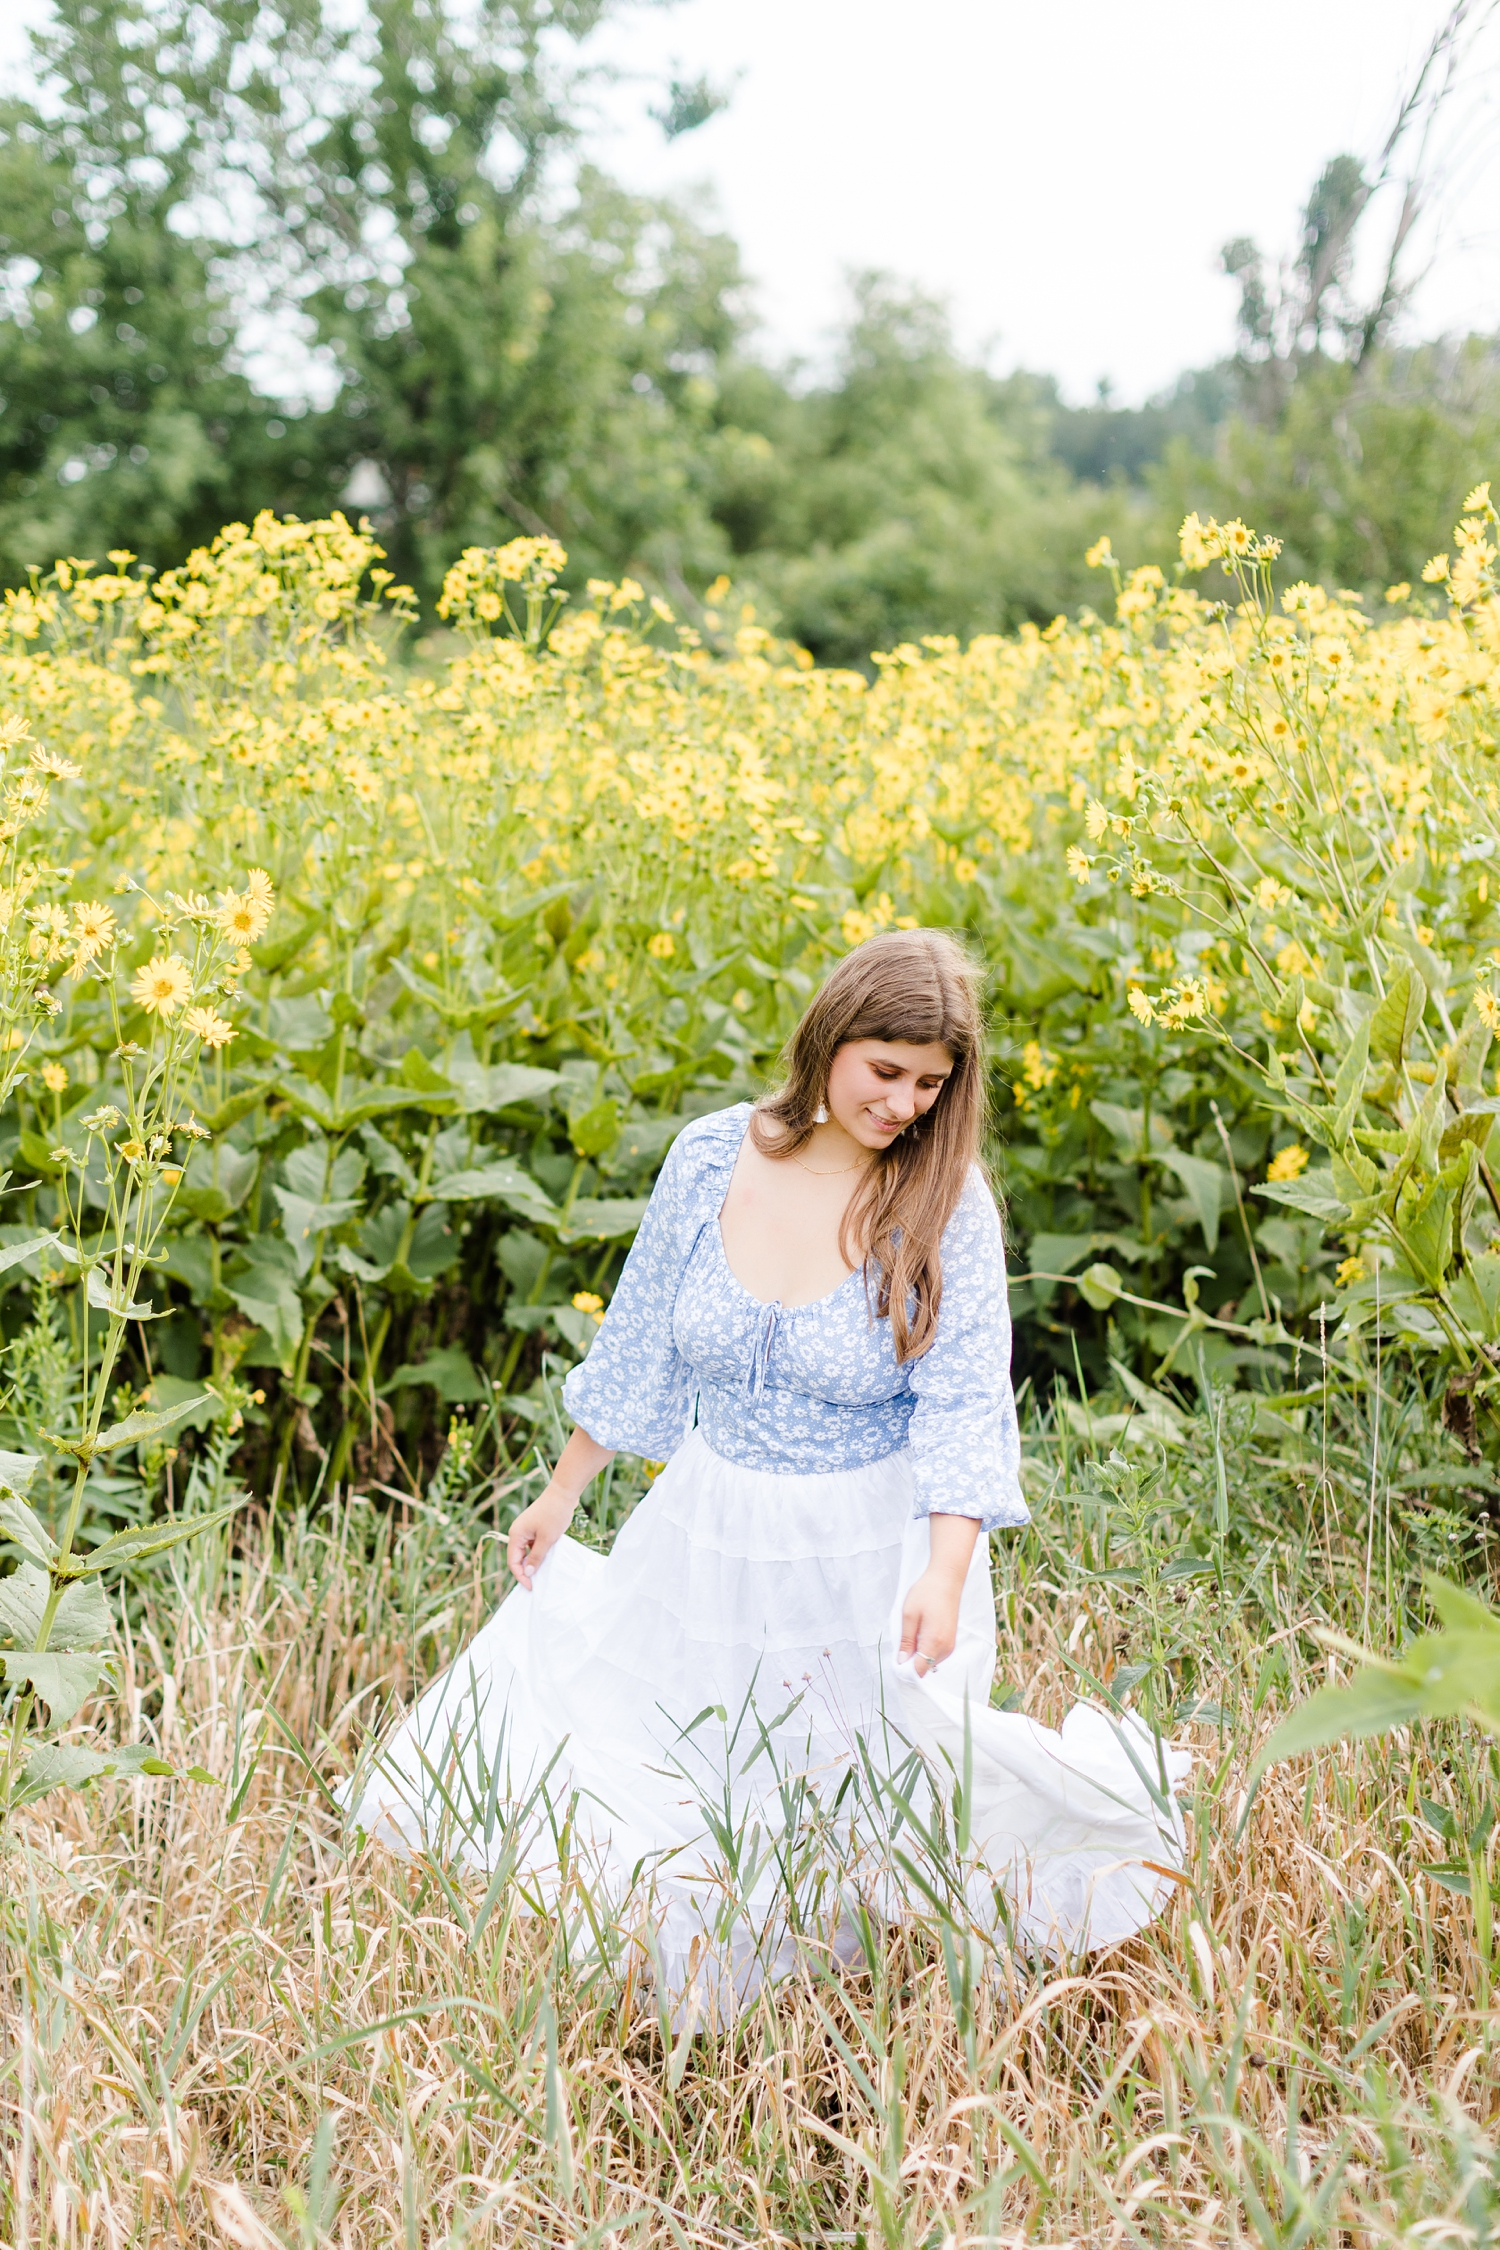 Caitlin twirls in a field of yellow wildflowers wearing a baby blue boho pheasant top and a white flowy skirt | CB Studio